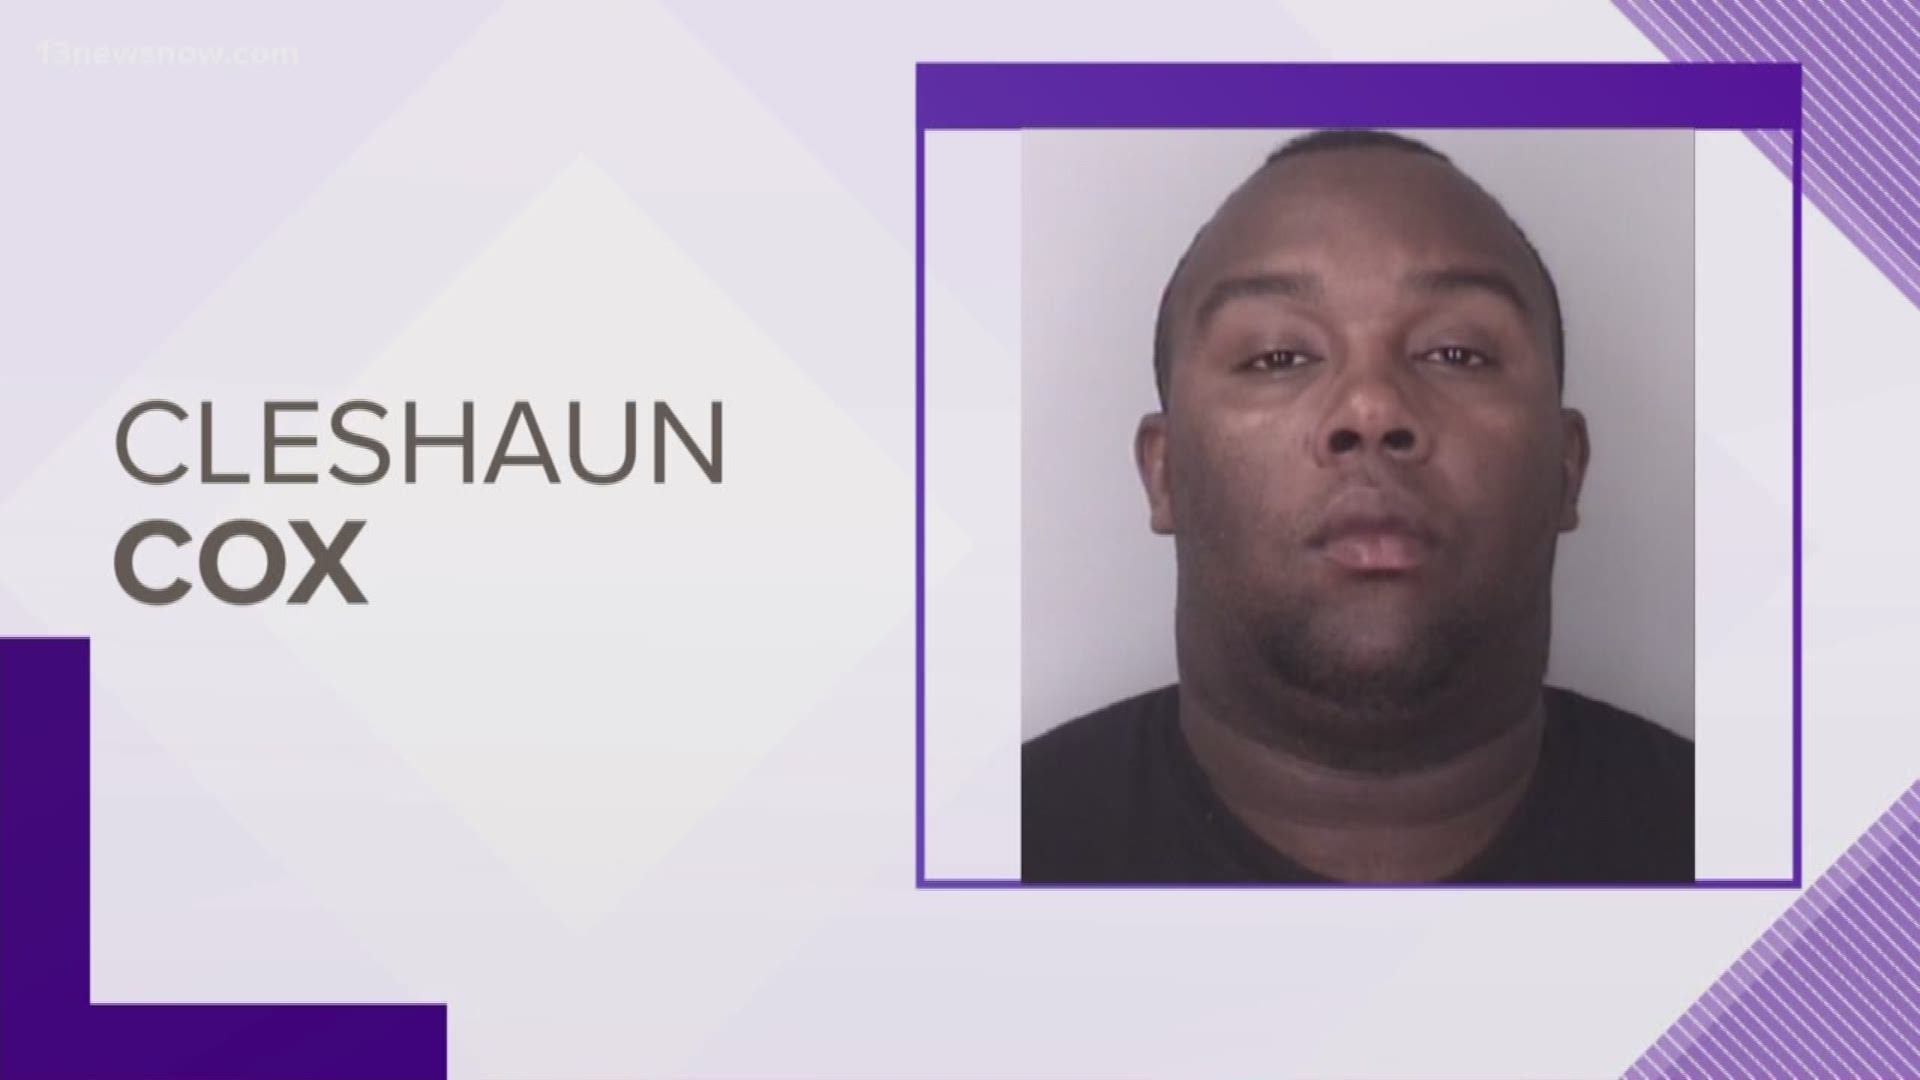 Police arrested Cleshaun Cox after the department received a complaint about an officer who acted inappropriately while on duty. The victim said Cox told her to get into his car, drove her somewhere and raped her before dropping her back off.